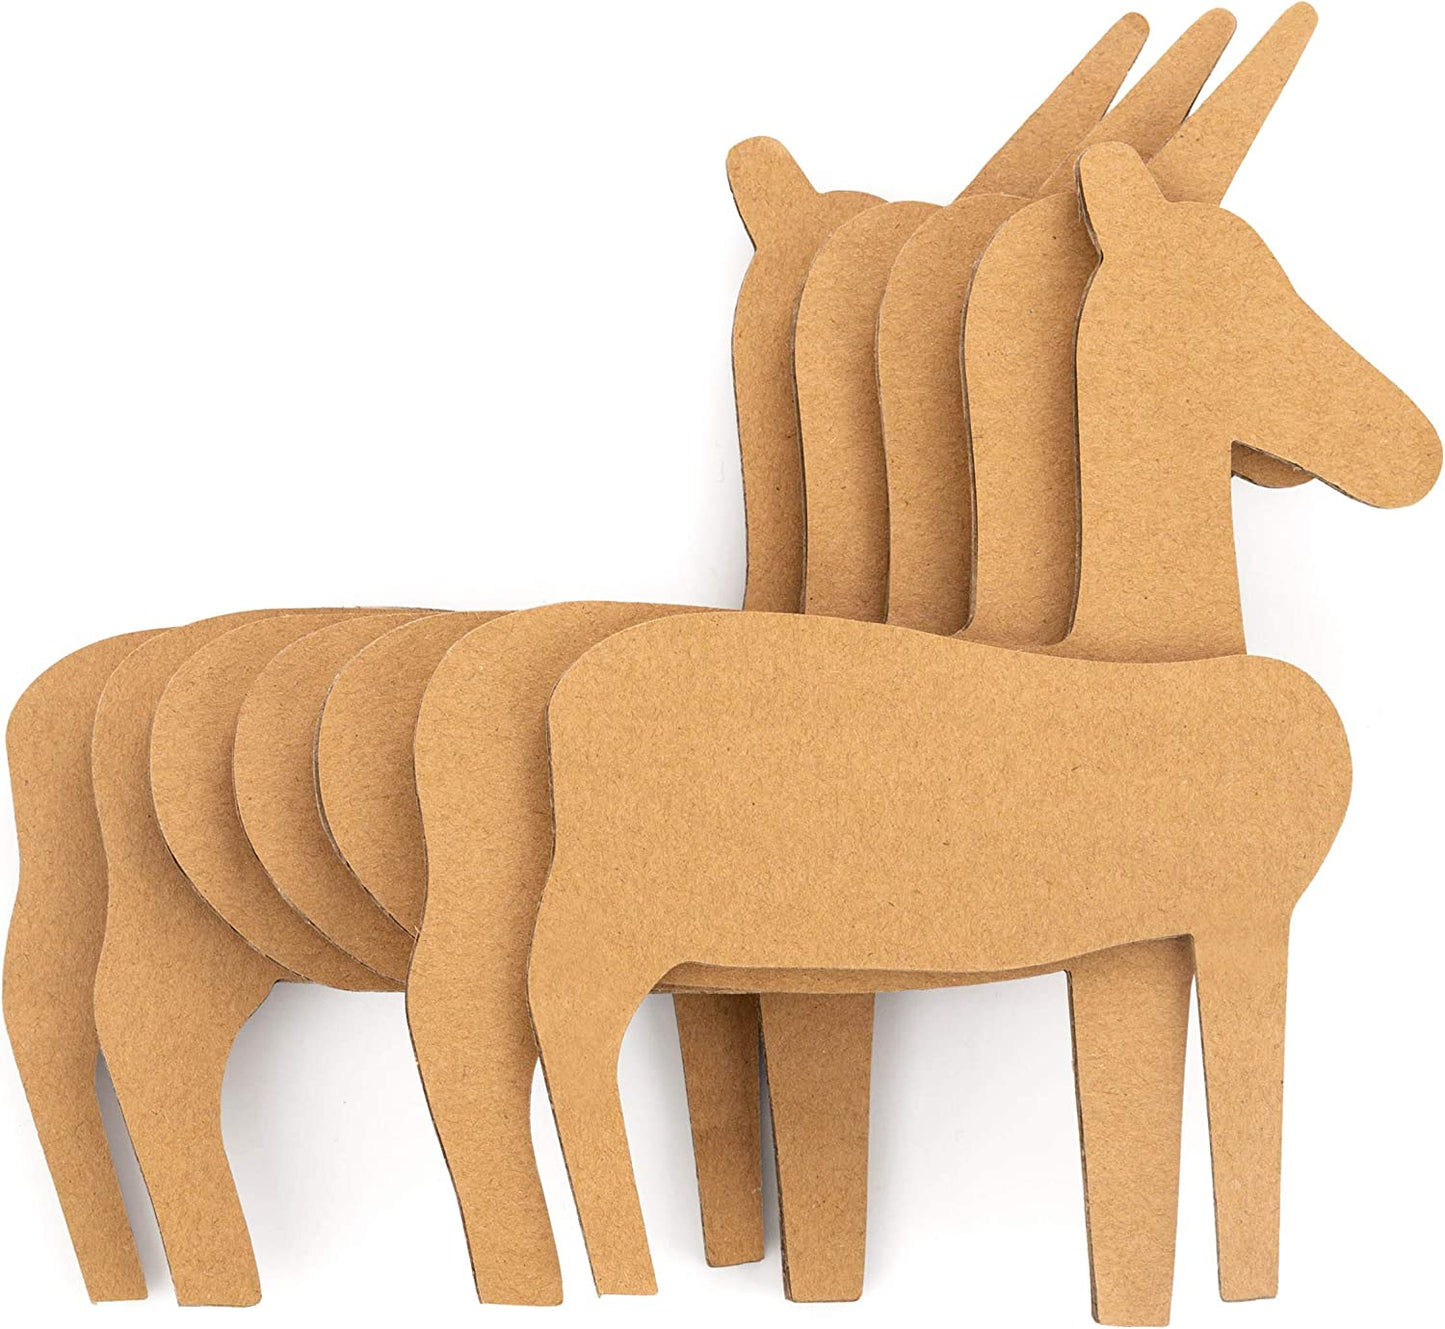 Made It! Yarn Animal Craft Kits For Kids decorate and wrap like pom-poms